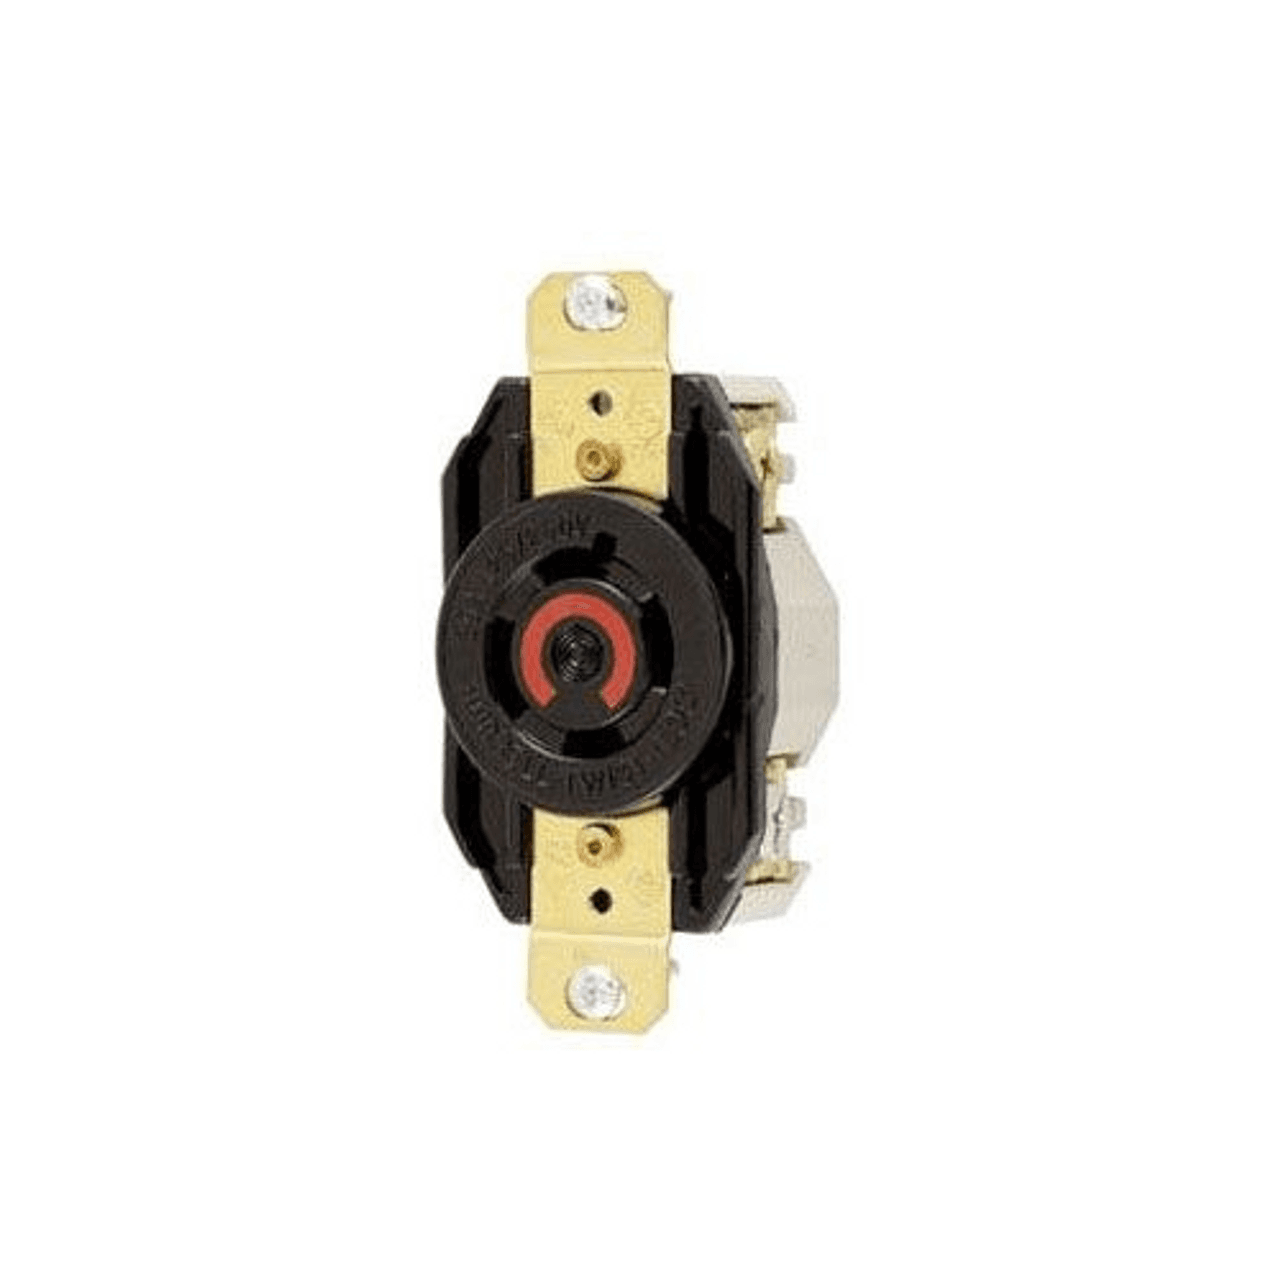 Hubbell HBL2410 Locking Devices, Twist-Lock®, Industrial, Single Flush Receptacle, 20A 125/250V, 3-Pole 4-Wire Grounding, NEMA L14-20R, Screw Terminal, Nylon face, Back and side wire, Black.  ; Wire restraint recess for both back and side wiring, greatly reduces the poss